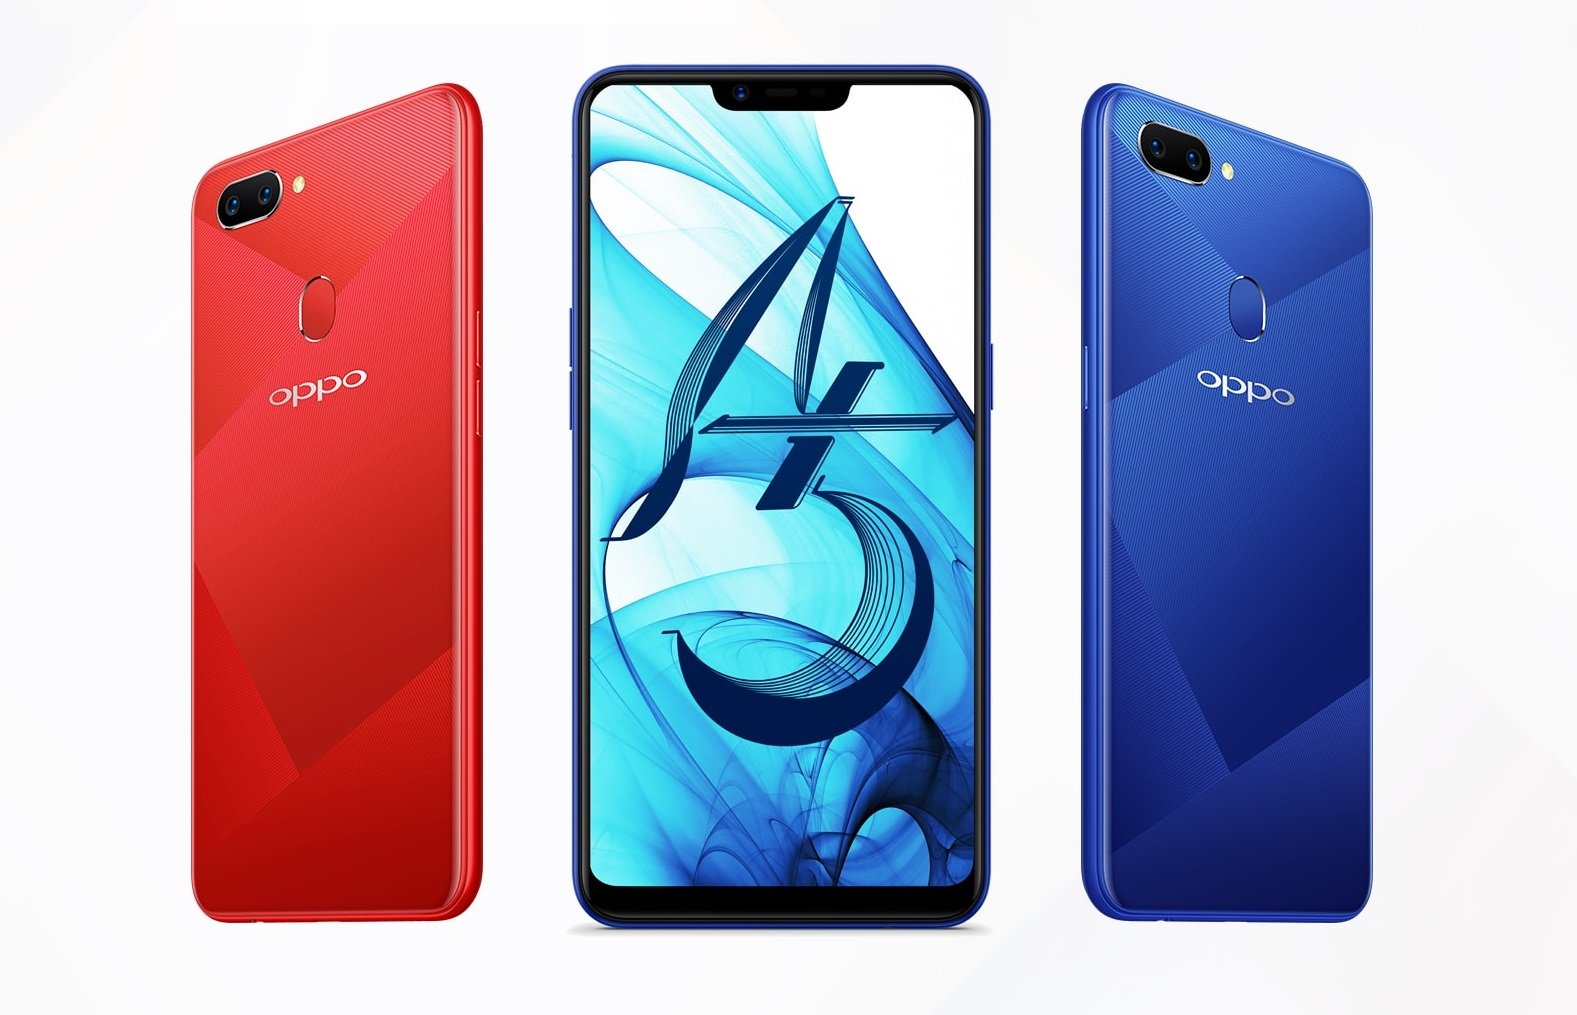 OPPO A5 featured